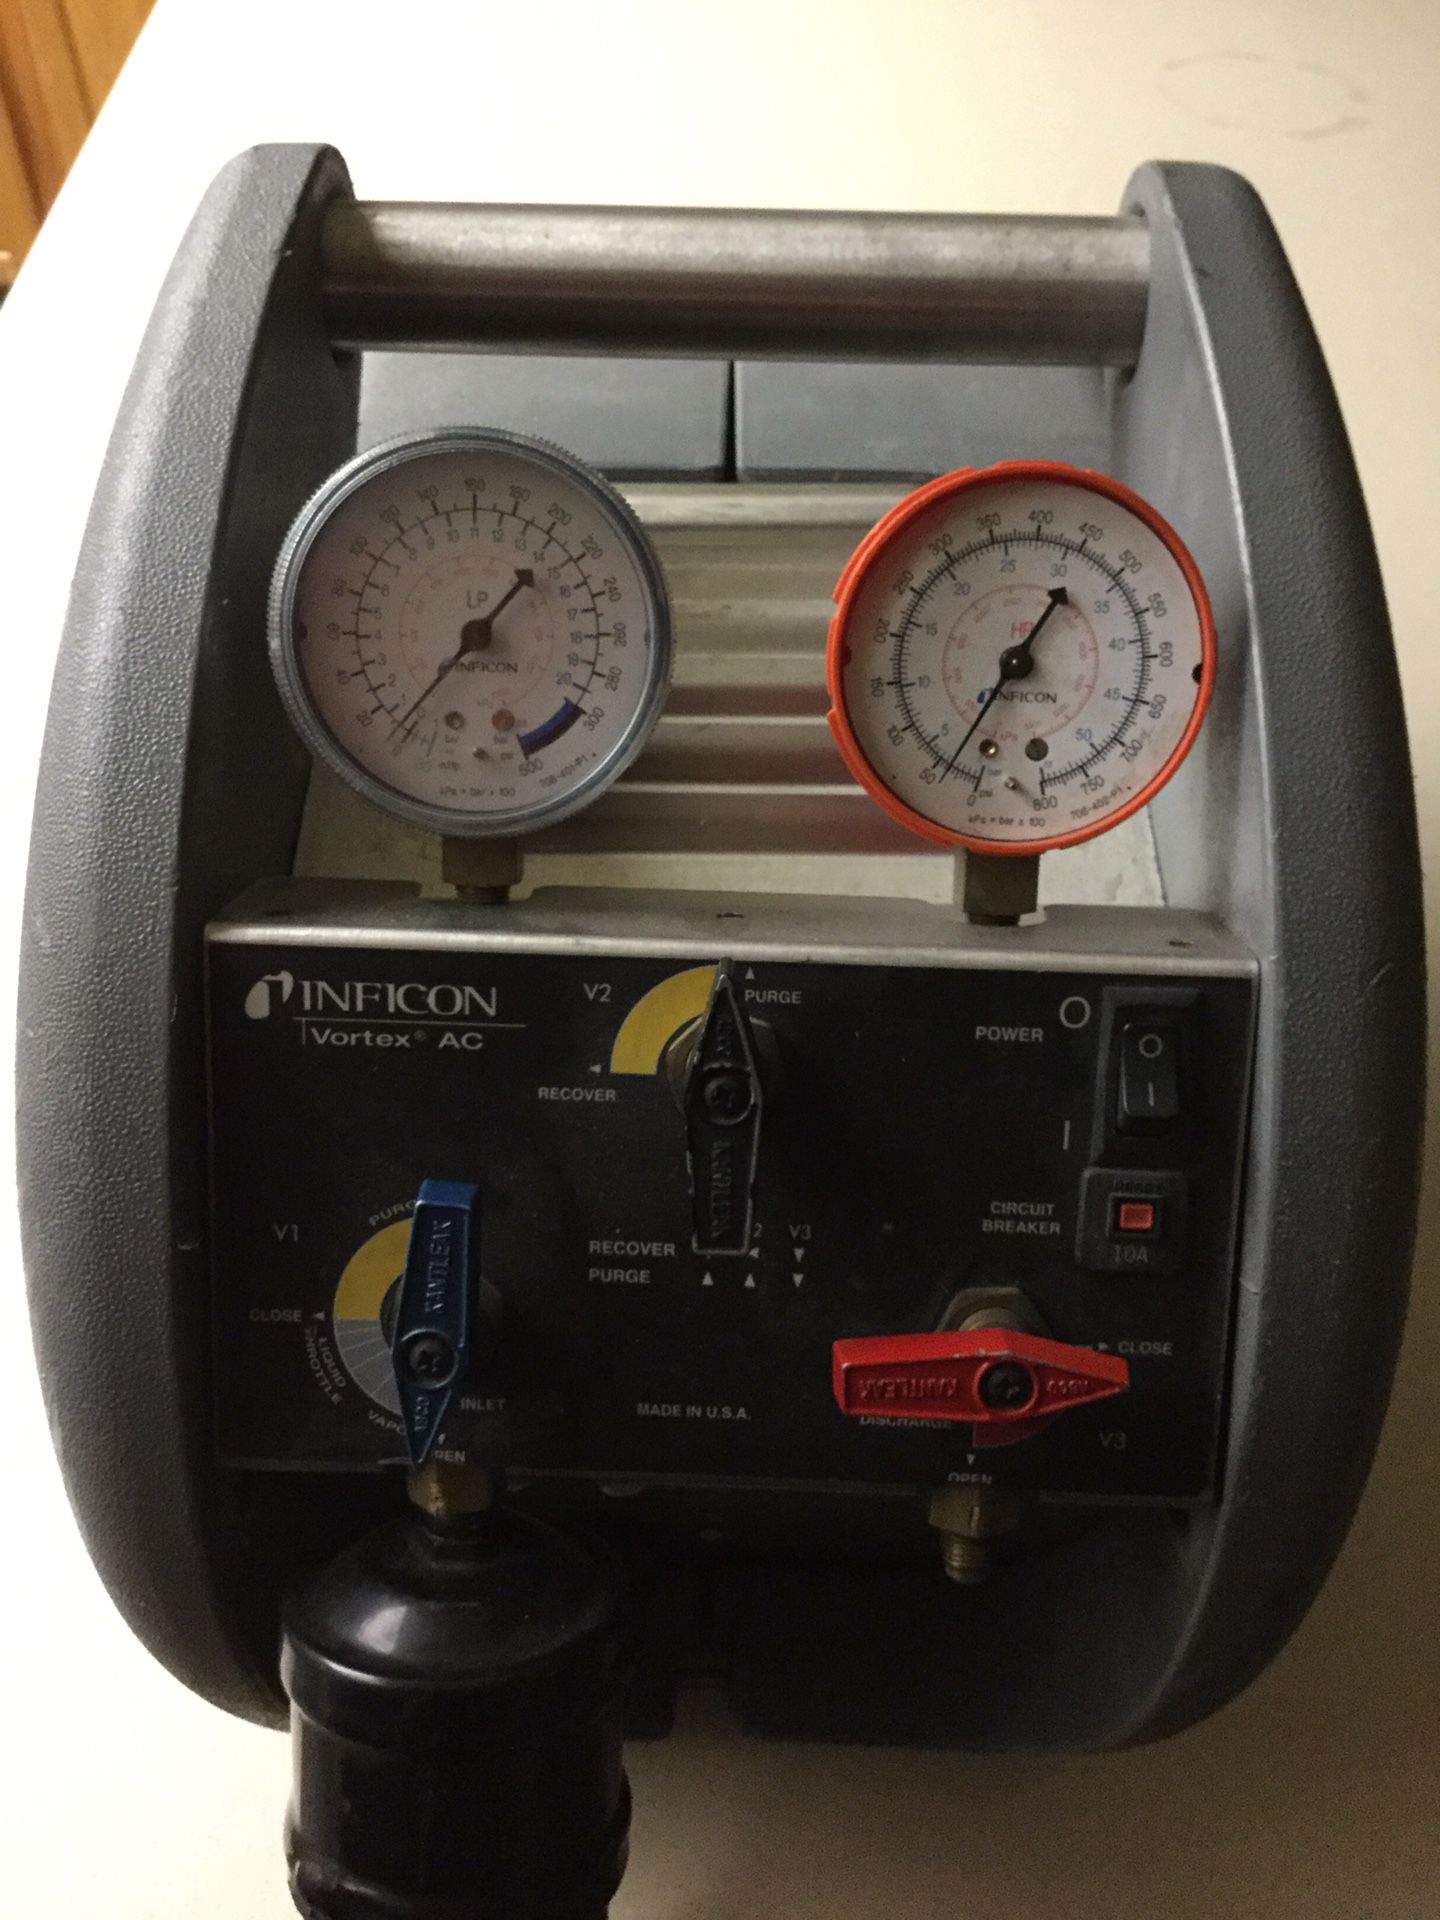 INFICON Vortex AC Duel Refrigerant Recovery Machine,1 hp, (Model #714-202-G1)  for Sale in Chandler, AZ OfferUp